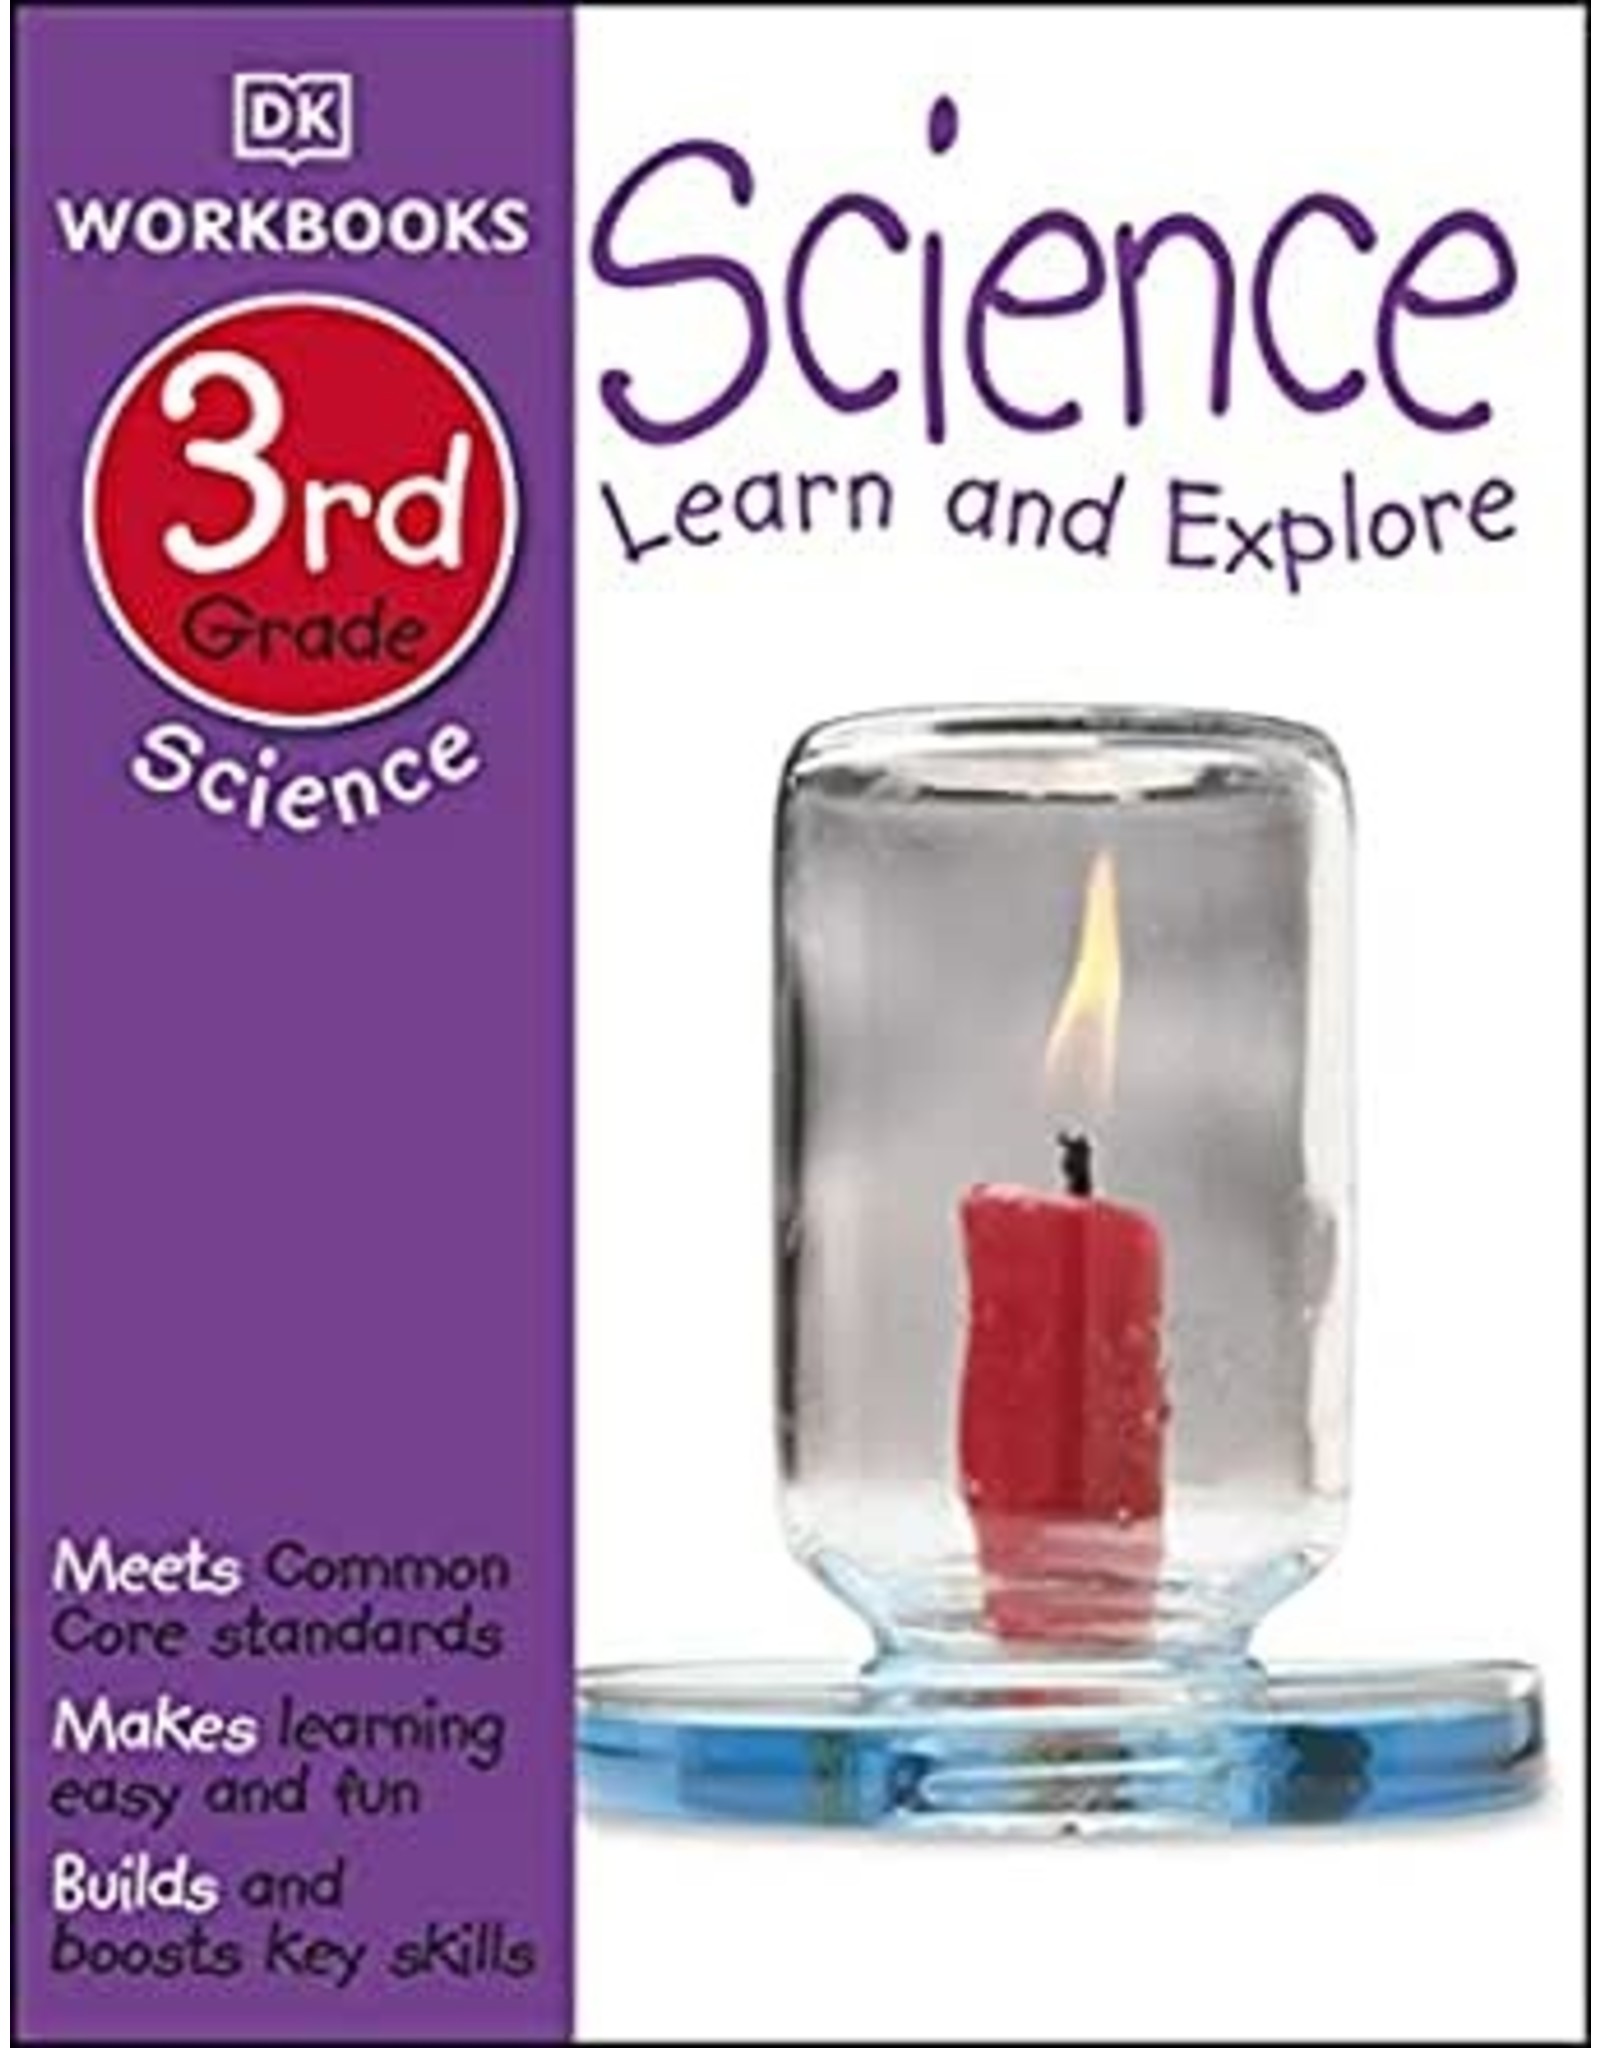 3rd Grade Science Learn and Explore